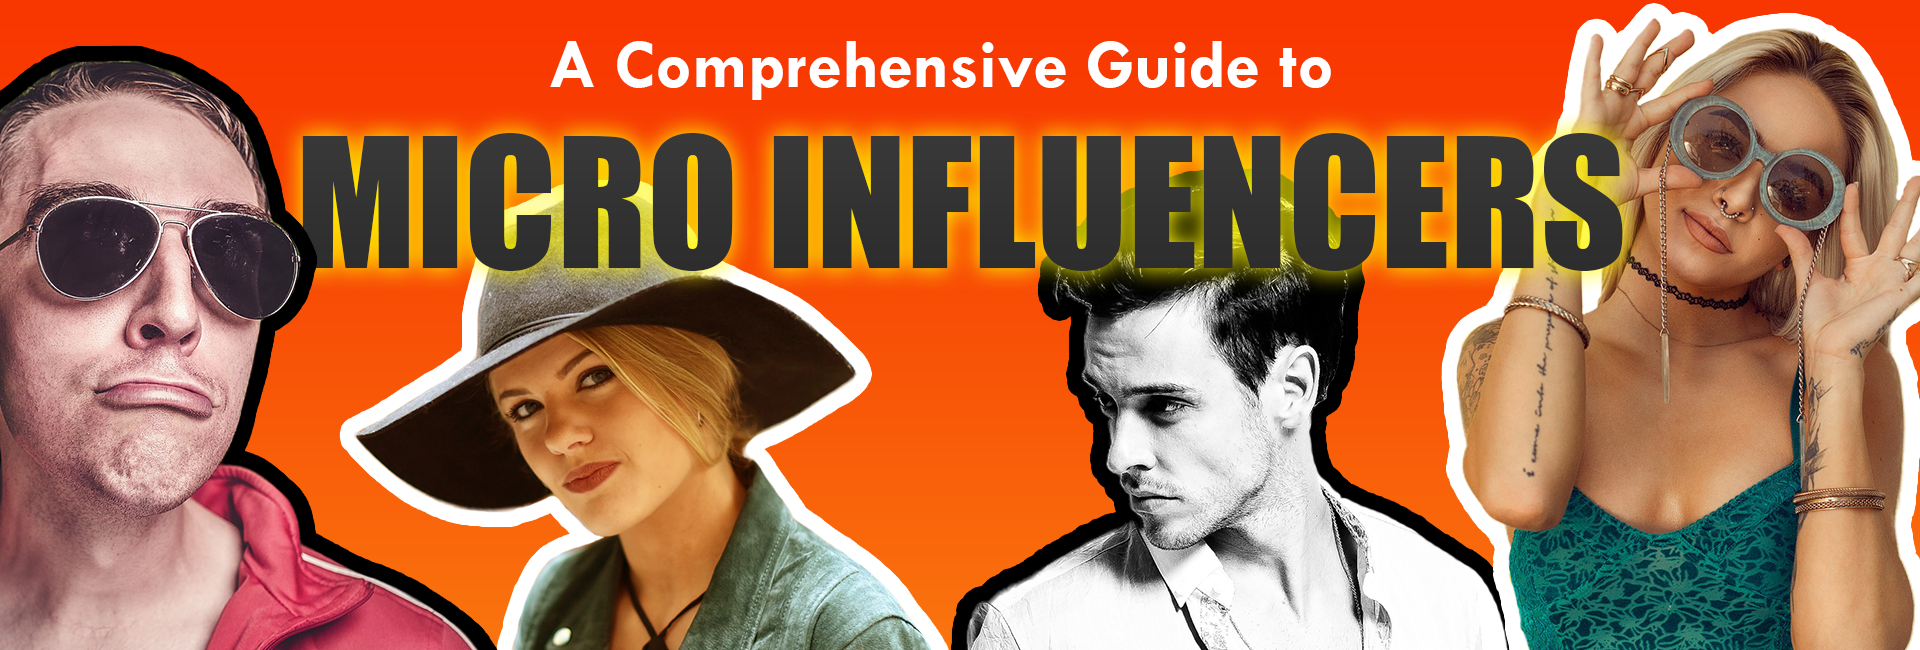 Micro Influencer Promotion: A Comprehensive Guide